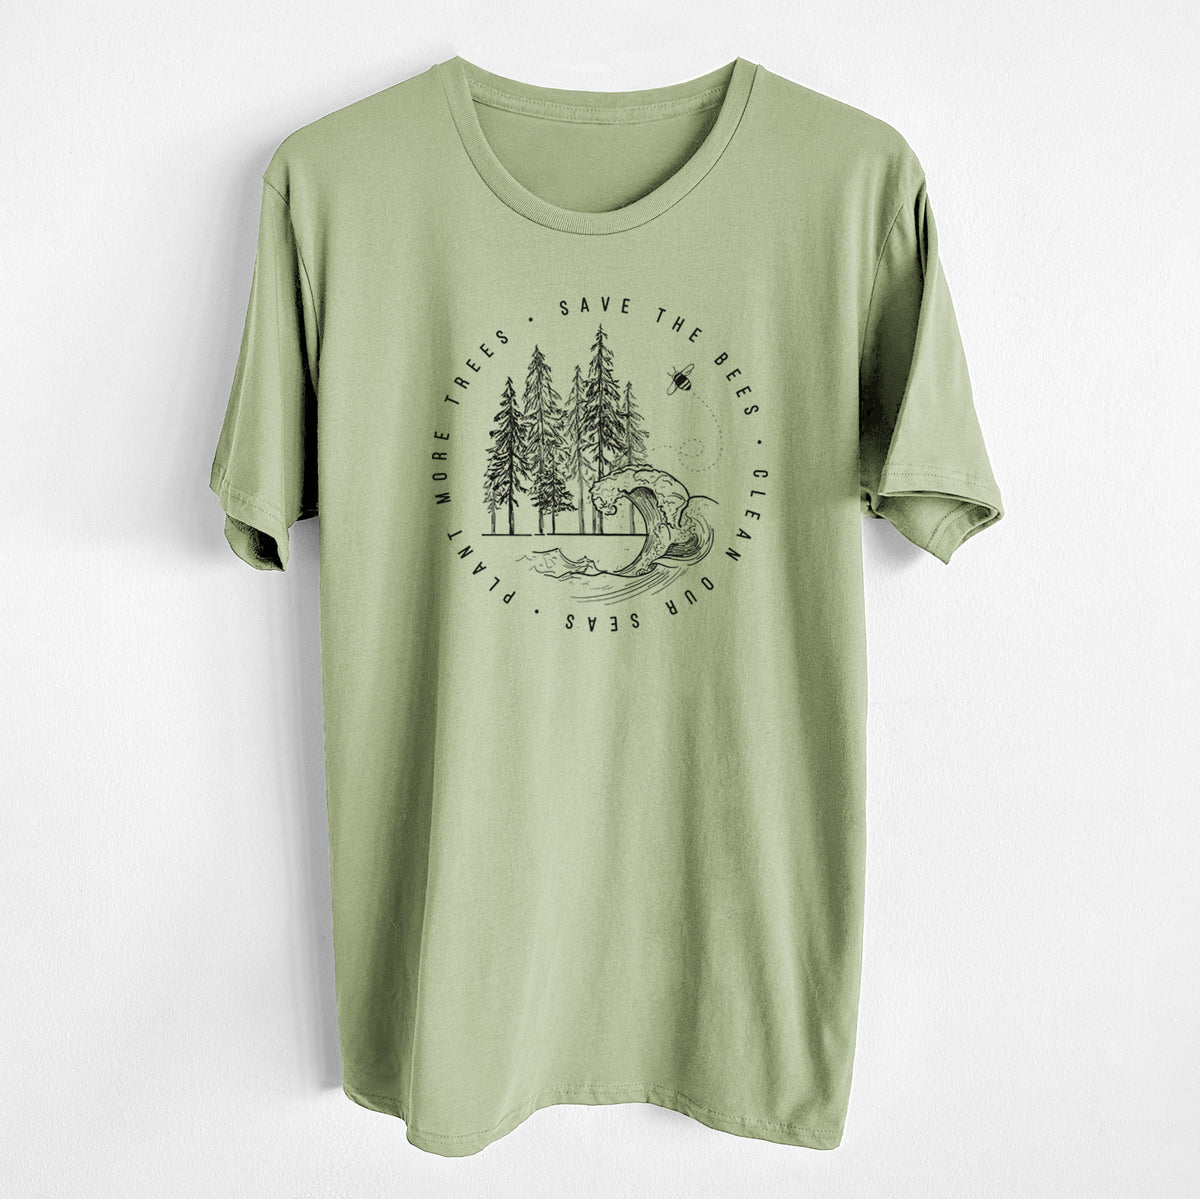 Save the Bees, Clean our Seas, Plant more Trees - Unisex Crewneck - Made in USA - 100% Organic Cotton